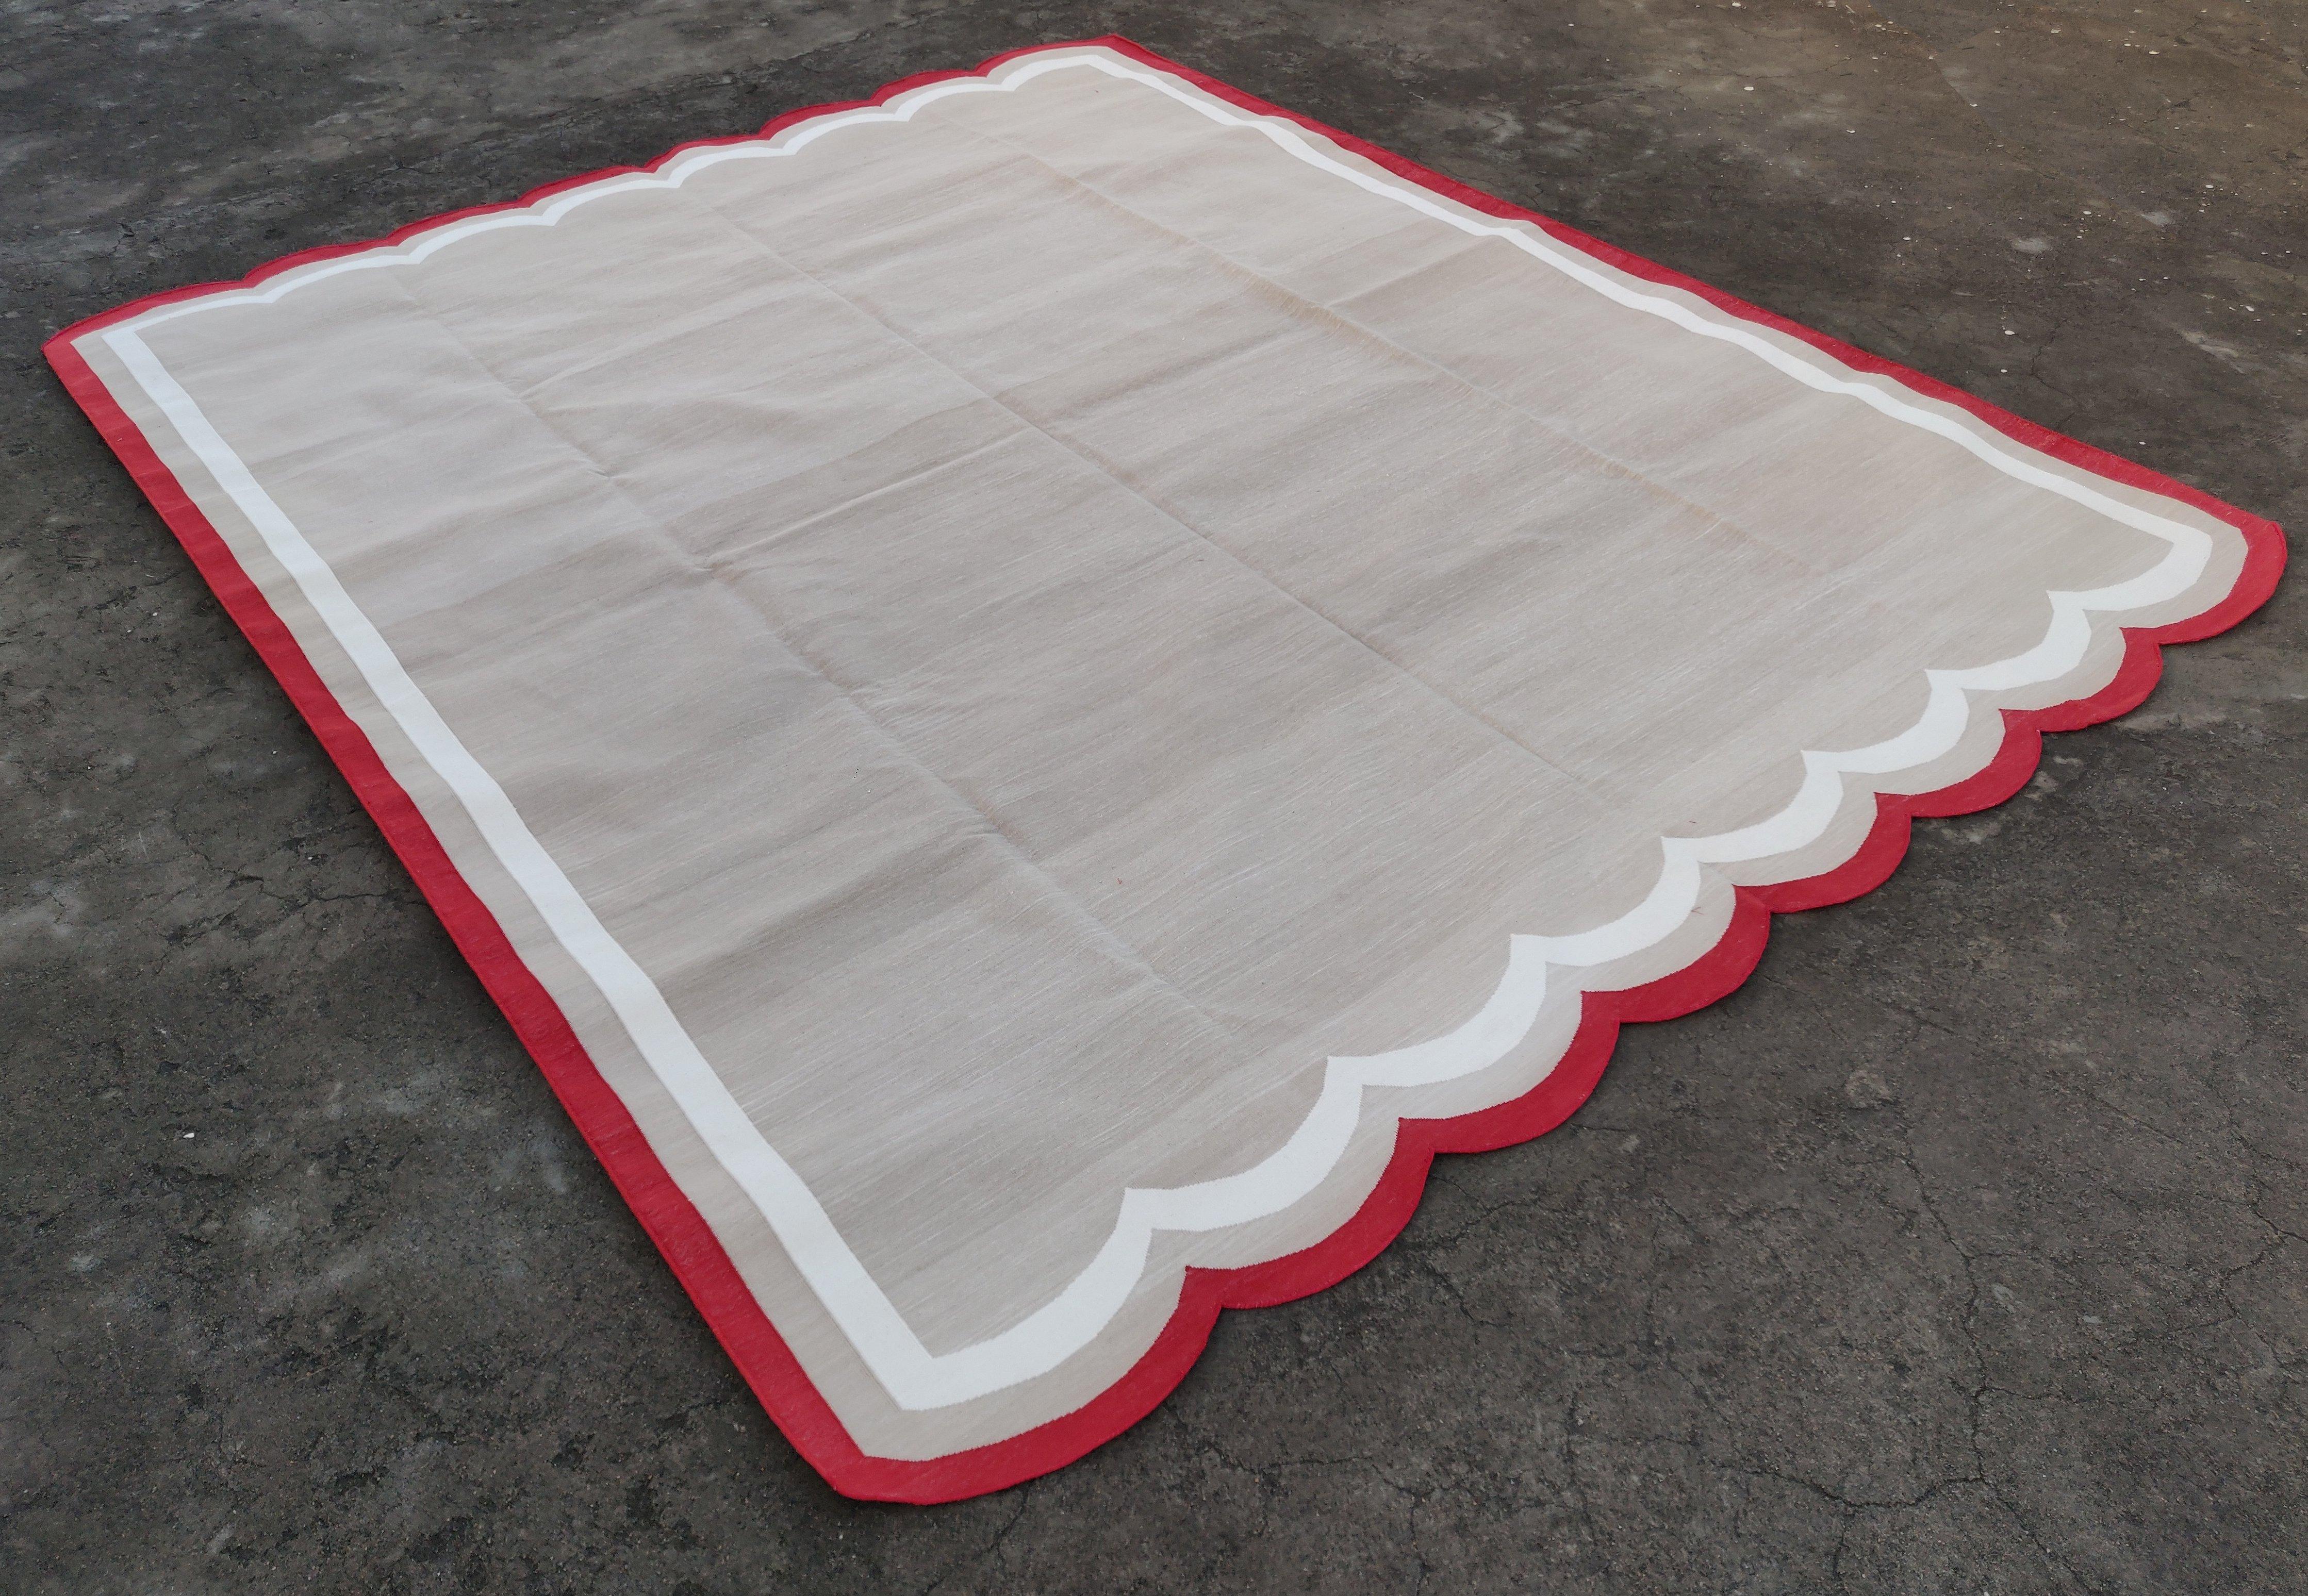 Cotton Vegetable Dyed Cream, Beige And Red Two Sided Scalloped Rug-8'x10' 
(Scallops runs on 6 Feet Sides)
These special flat-weave dhurries are hand-woven with 15 ply 100% cotton yarn. Due to the special manufacturing techniques used to create our